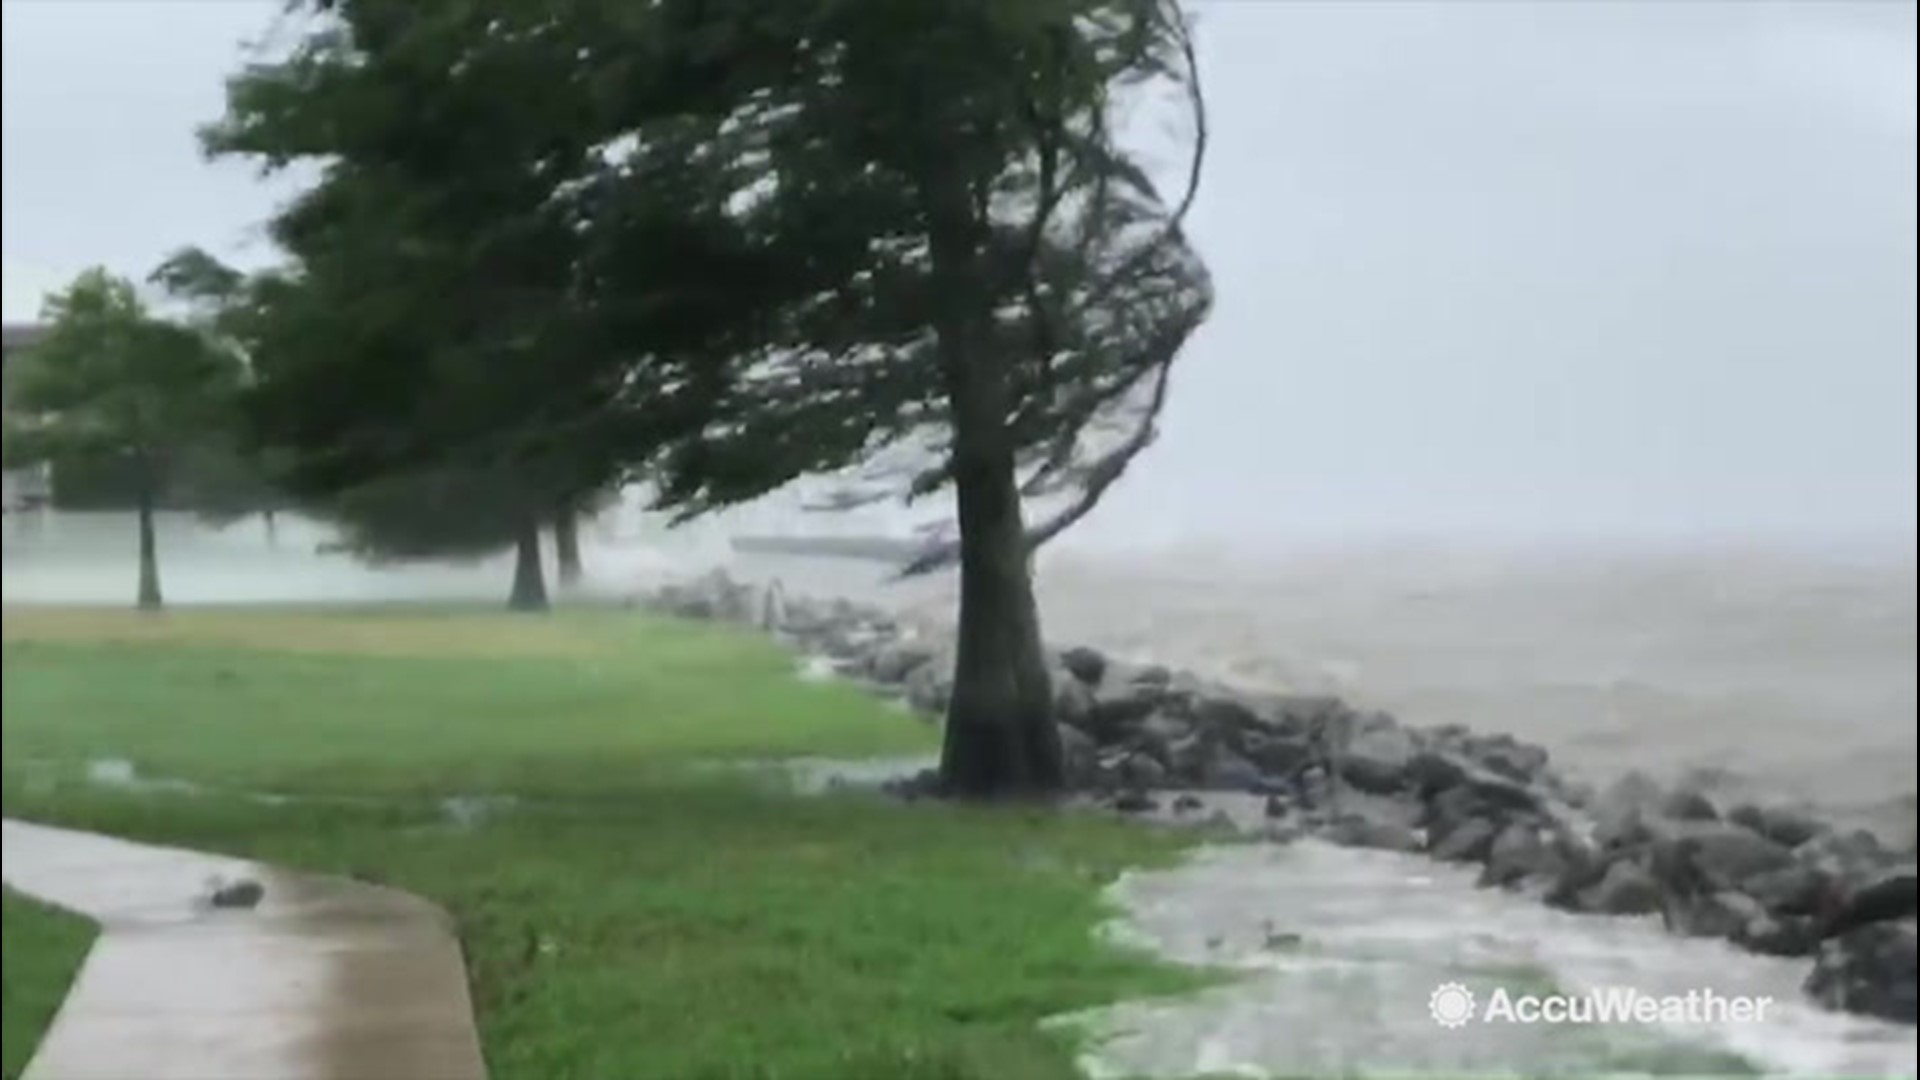 The Atchafalaya River near Morgan City, Louisiana shook as Hurricane Barry made landfall on July 13. The violent wind and rain kicked up waves that left the coastline severely inundated.